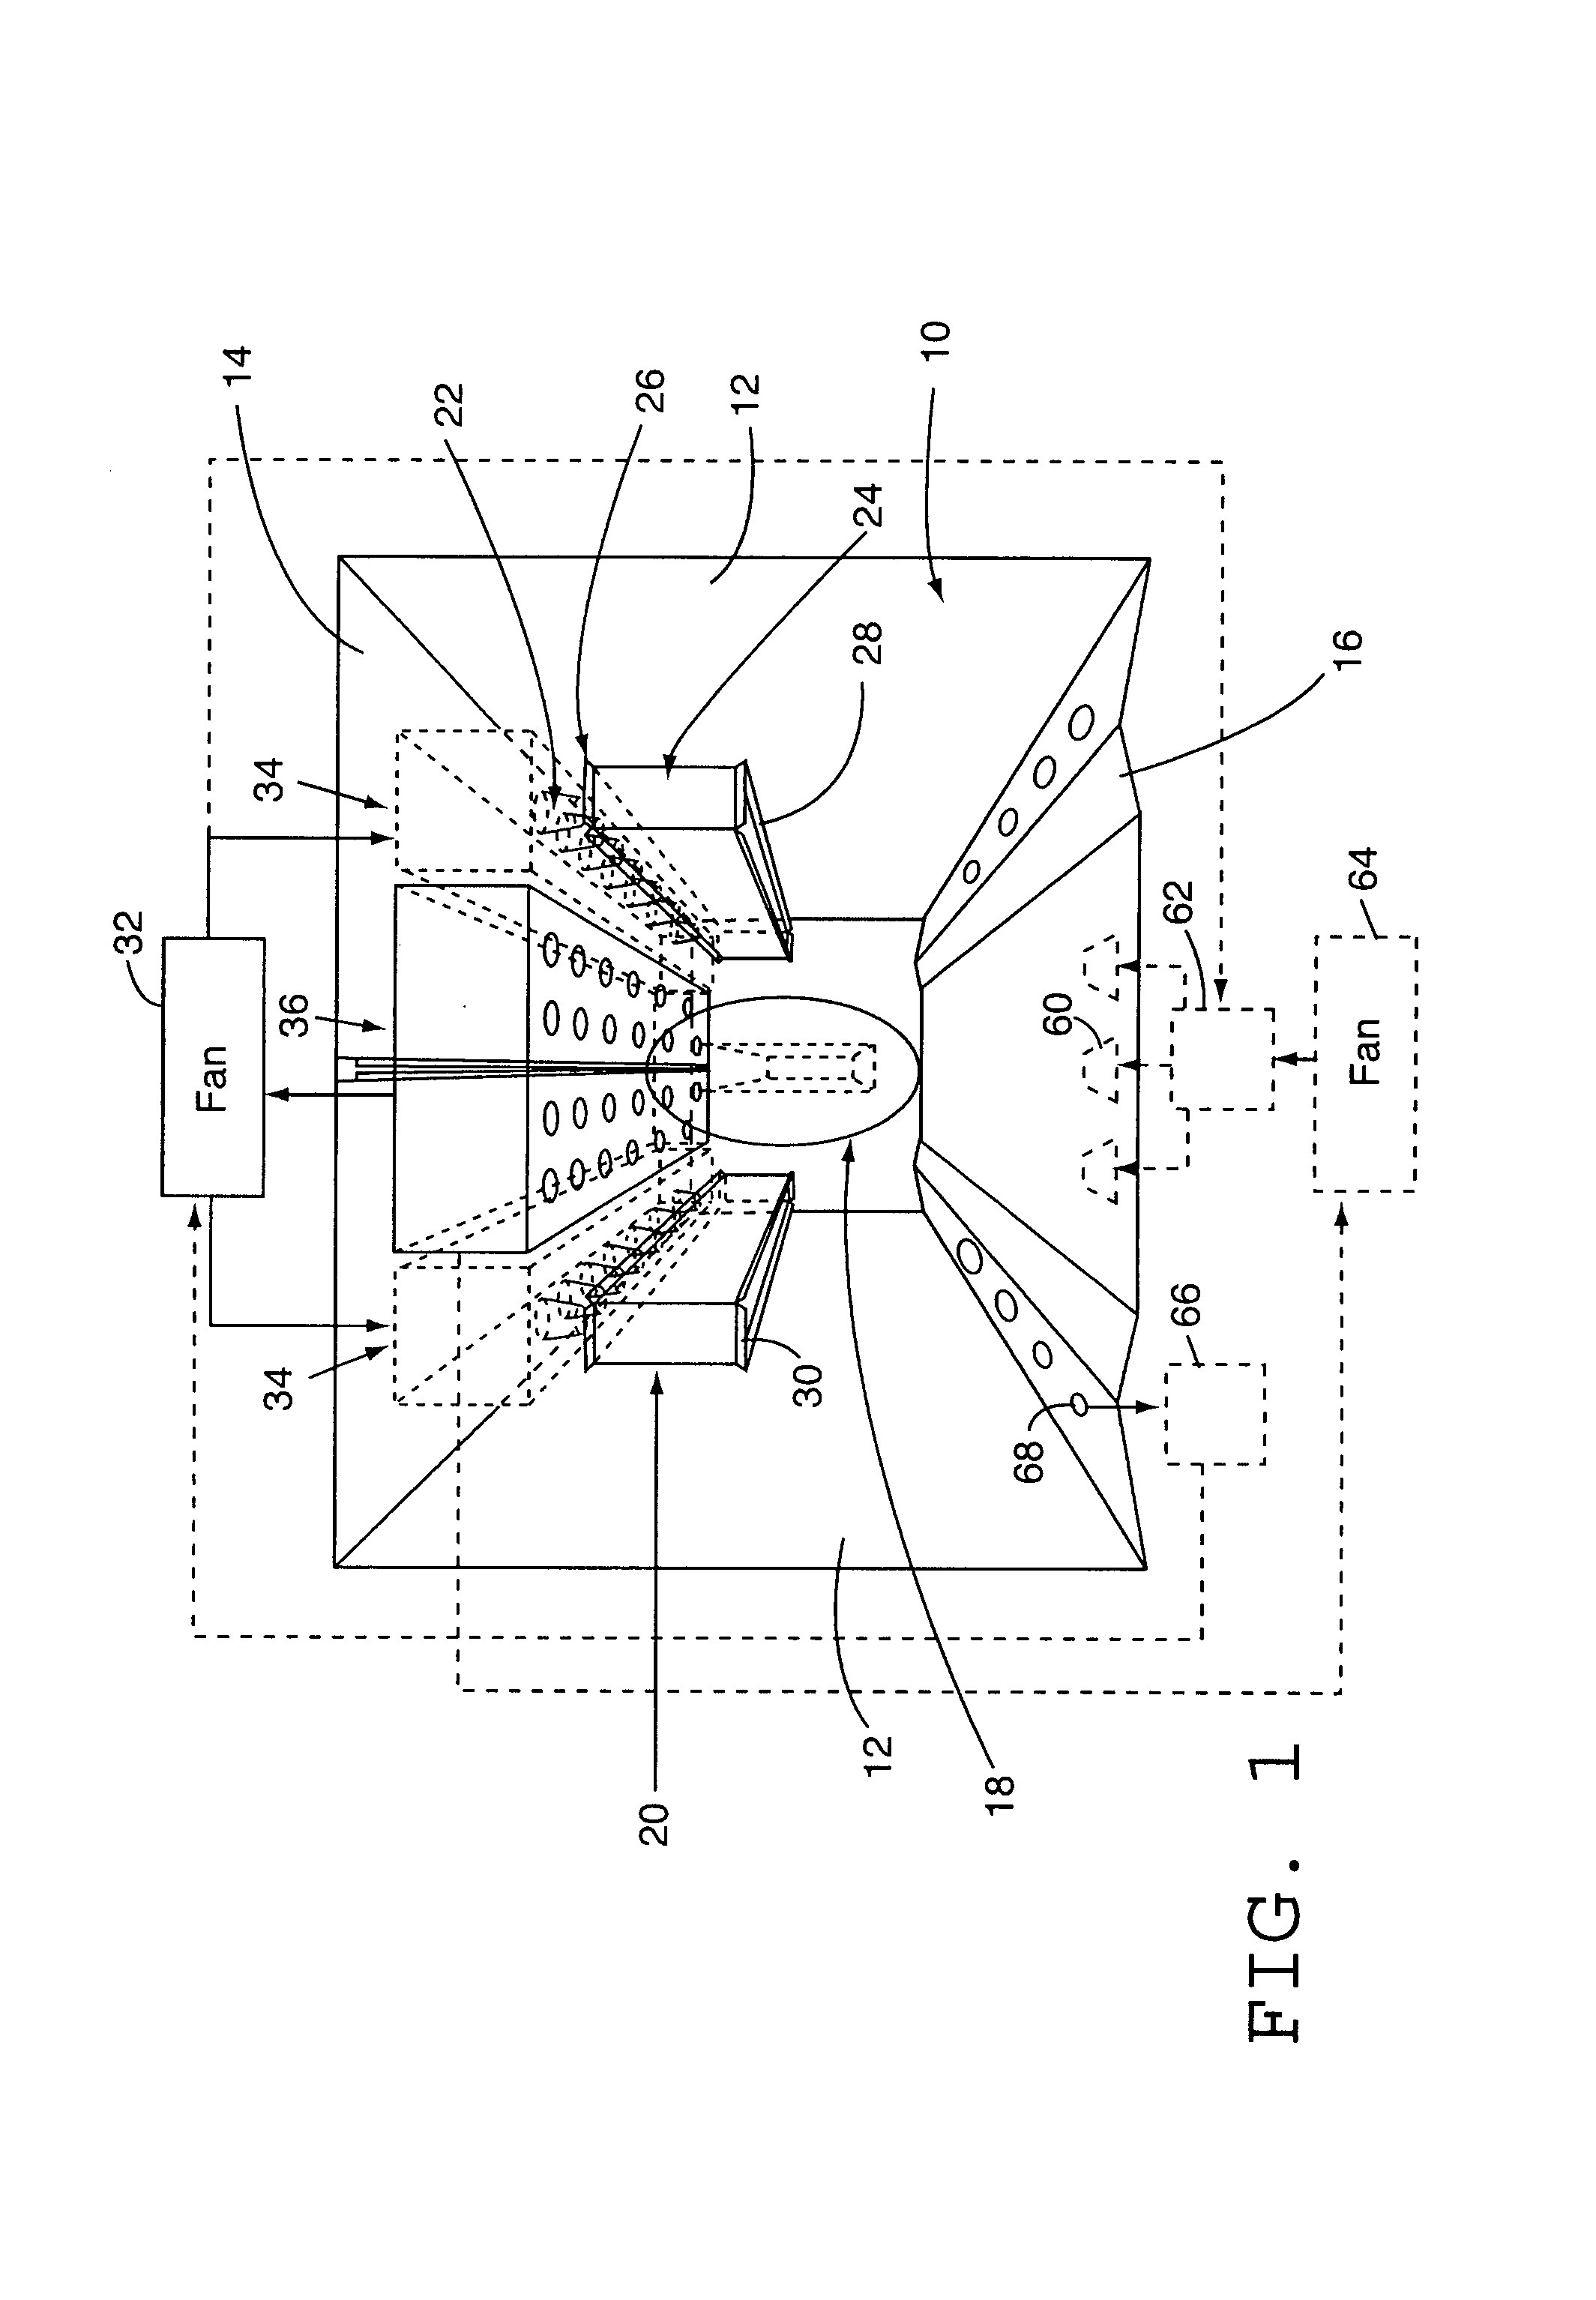 Convection oven with turbo flow air nozzle to increase air flow and method of using same